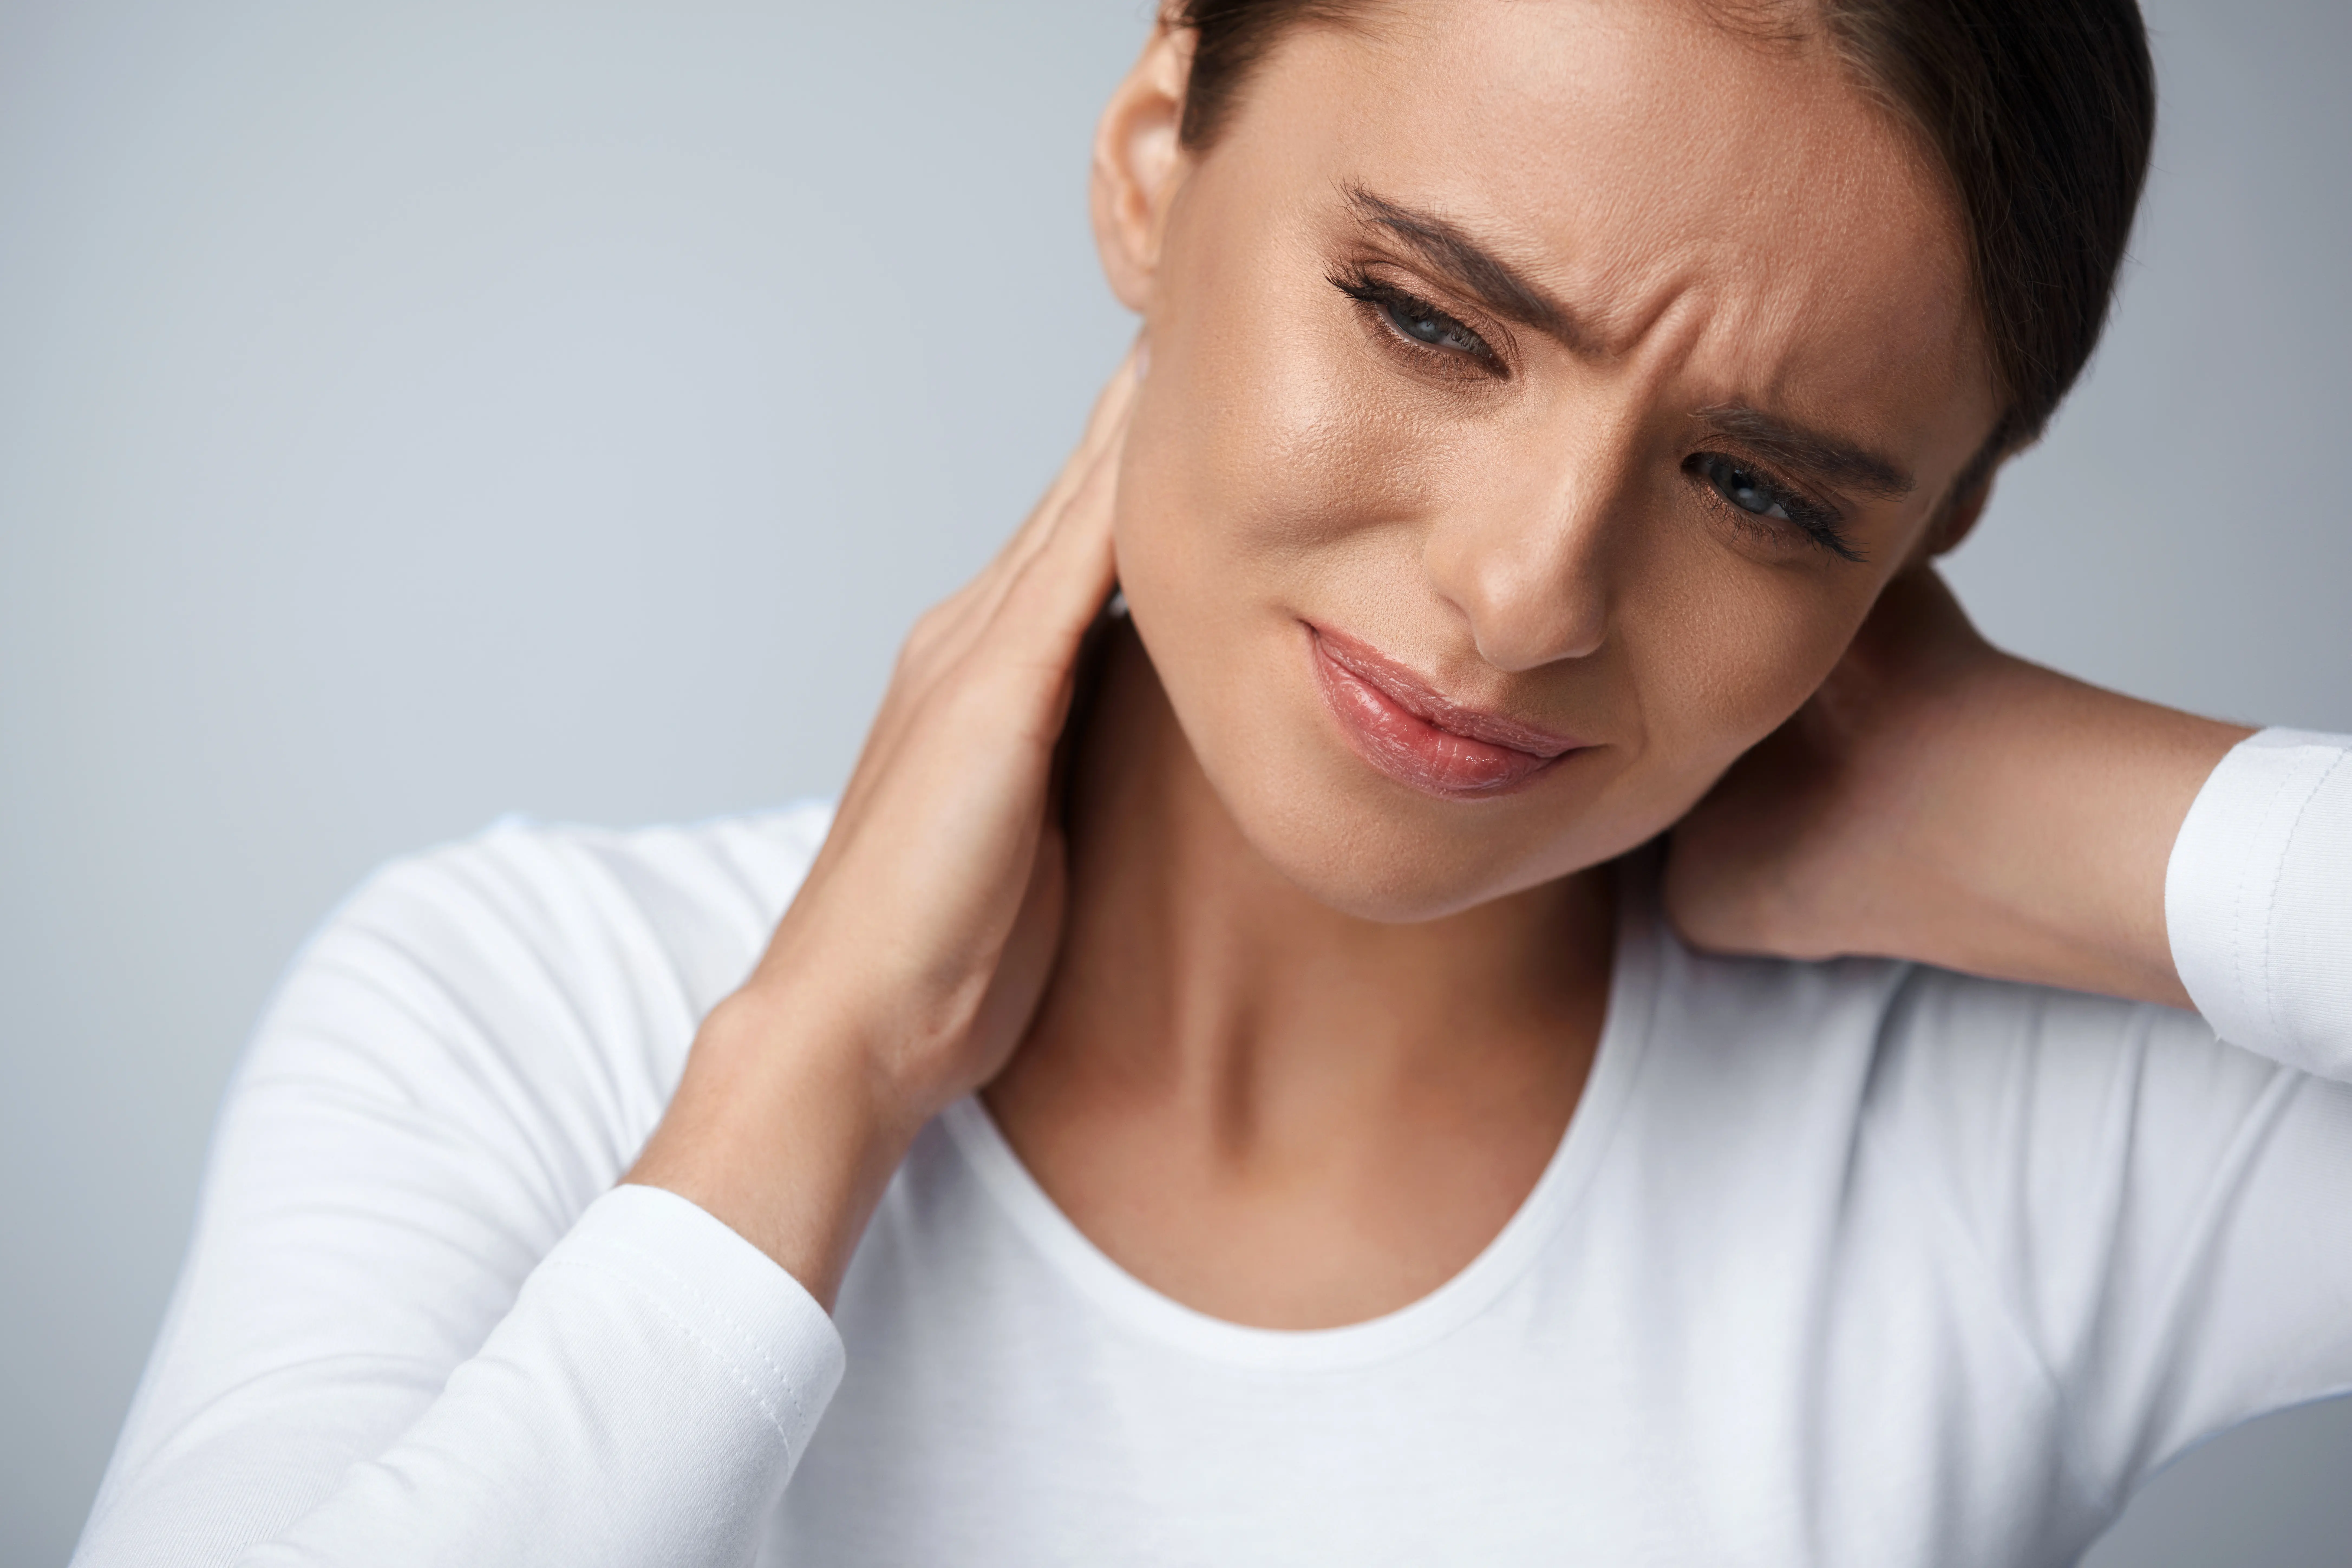 Is it Chronic or Acute Pain